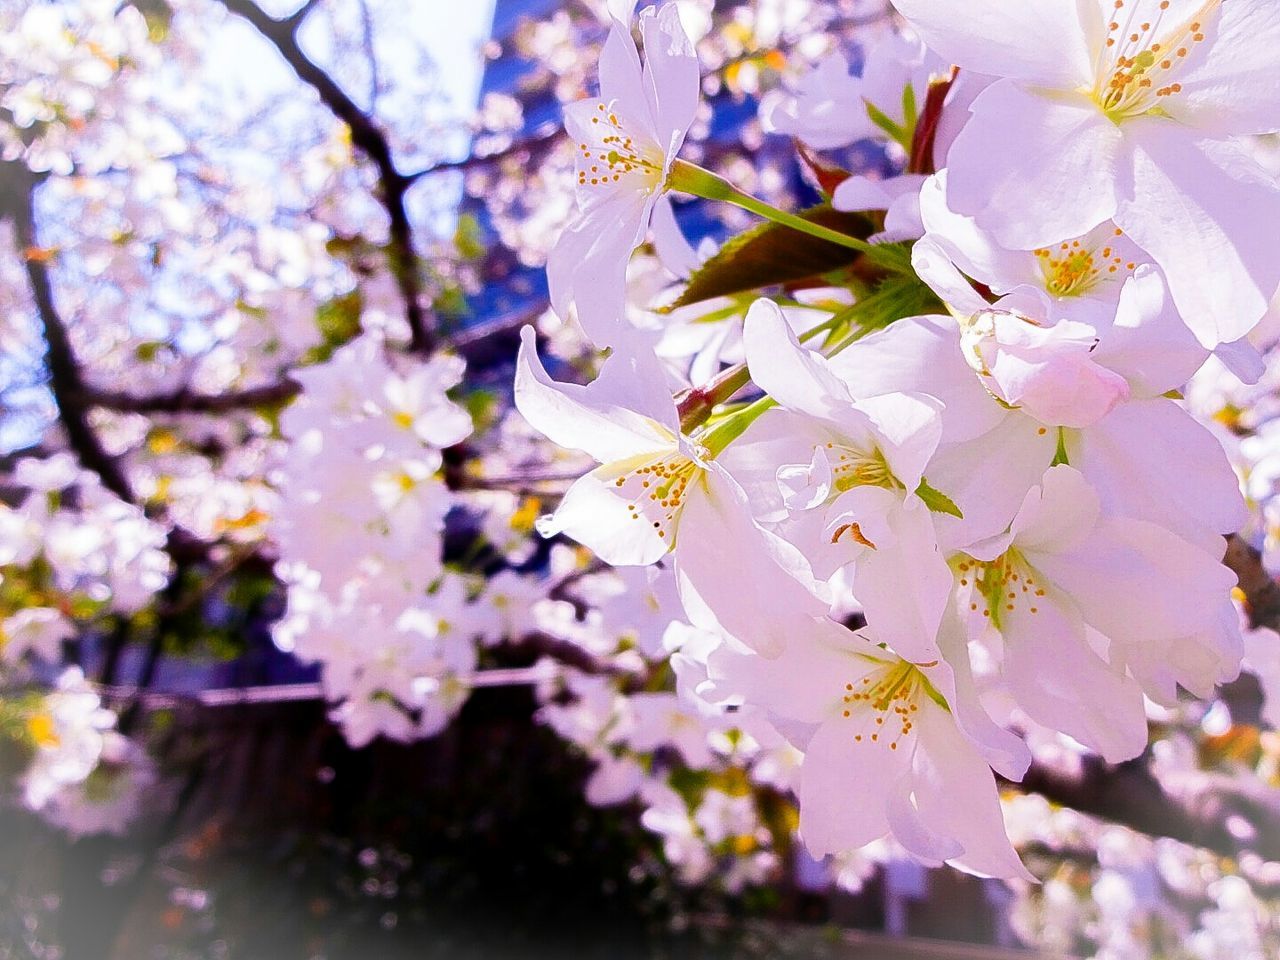 flower, freshness, fragility, cherry blossom, growth, branch, petal, tree, blossom, beauty in nature, cherry tree, nature, in bloom, close-up, blooming, focus on foreground, flower head, springtime, white color, pollen